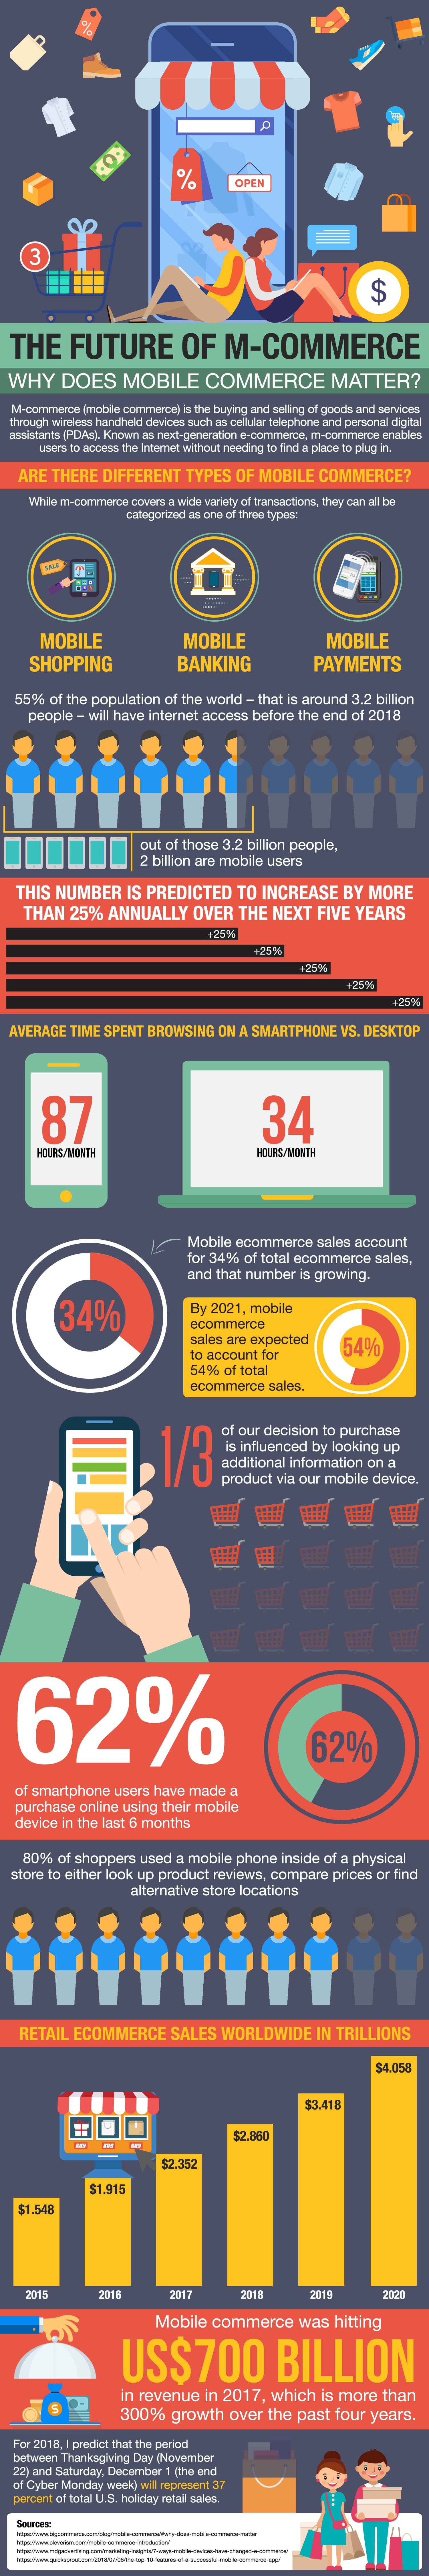 The Future Of Mobile Commerce Infographic. Why Does Mobile Commerce Matter? M-commerce (mobile commerce) is the buying and selling of goods and services through wireless handheld devices such as smartphones and personal digital assistants (PDAs). Known as next-generation e-commerce, m-commerce enables users to access the Internet without needing to find a place to plug in. While m-commerce covers a wide variety of transactions, they can all be categorized as one of three types: Mobile Shopping, Mobile Banking and Mobile Payments. 55% of the population of the world - that is around 3.2 billion people - will have internet access before the end of 2018. Out of those 3.2 billion people, 2 billion are mobile users. The number is predicted to increase by more than 25% annually over the next five years. Average time spent browsing on a smartphone vs. desktop is 87 hours/month vs. 34 hours/month respectively. Mobile eCommerce sales account for 34% of total eCommerce sales, and that number is growing. By 2021, mobile ecommerce sales are expected to account for 54% of total eCommerce sales. Our decision to purchase is influenced by looking up additional information on a product via our mobile devices. 62% of smartphone users have made a purchase online using their mobile device in the last 6 months. 80% of shoppers used a mobile phone inside of a physical store to either look up product reviews, compare prices or find alternative store locations. Mobile commerce was hitting US$700 Billion in revenue in 2017, which is more than 300% growth over the past four years. For 2018, I predict that the period between Thanksgiving Day (November 22) and Saturday, December 1 (the end of Cyber Monday week) will represent 37 percent of total U.S. holiday retail sales.